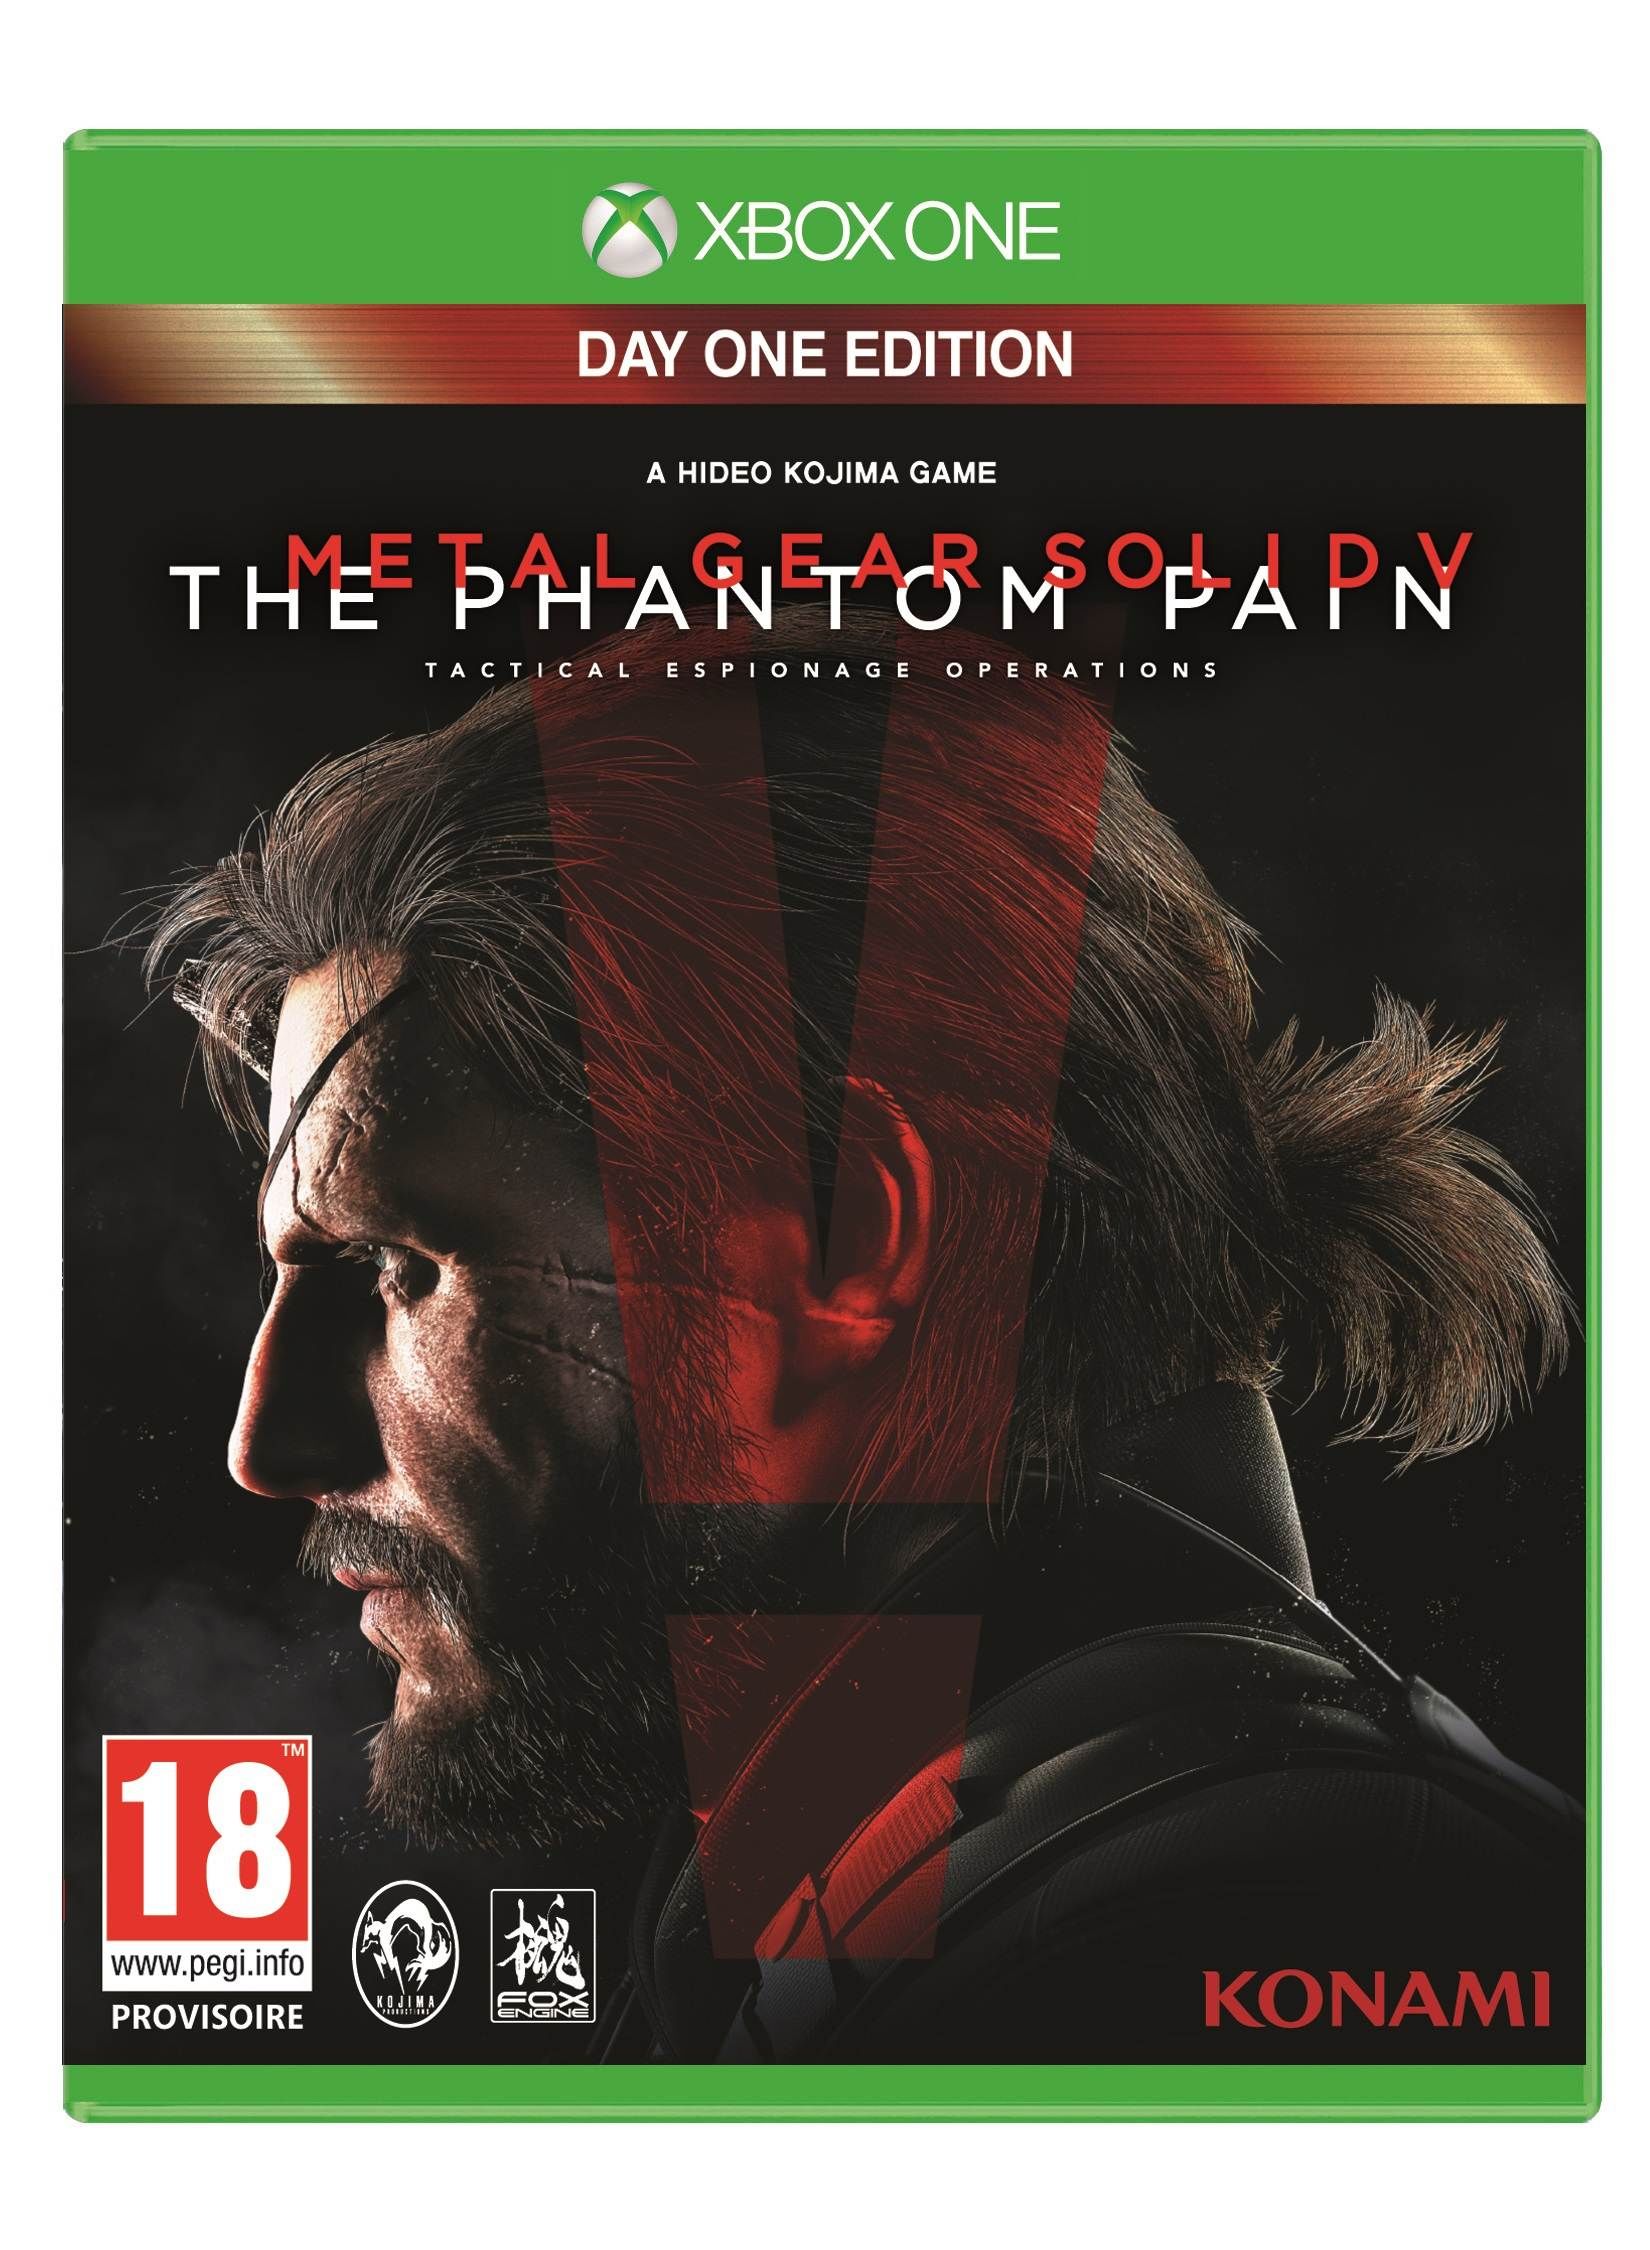 Metal Gear Solid 5 : The Phantom Pain Day One Edition